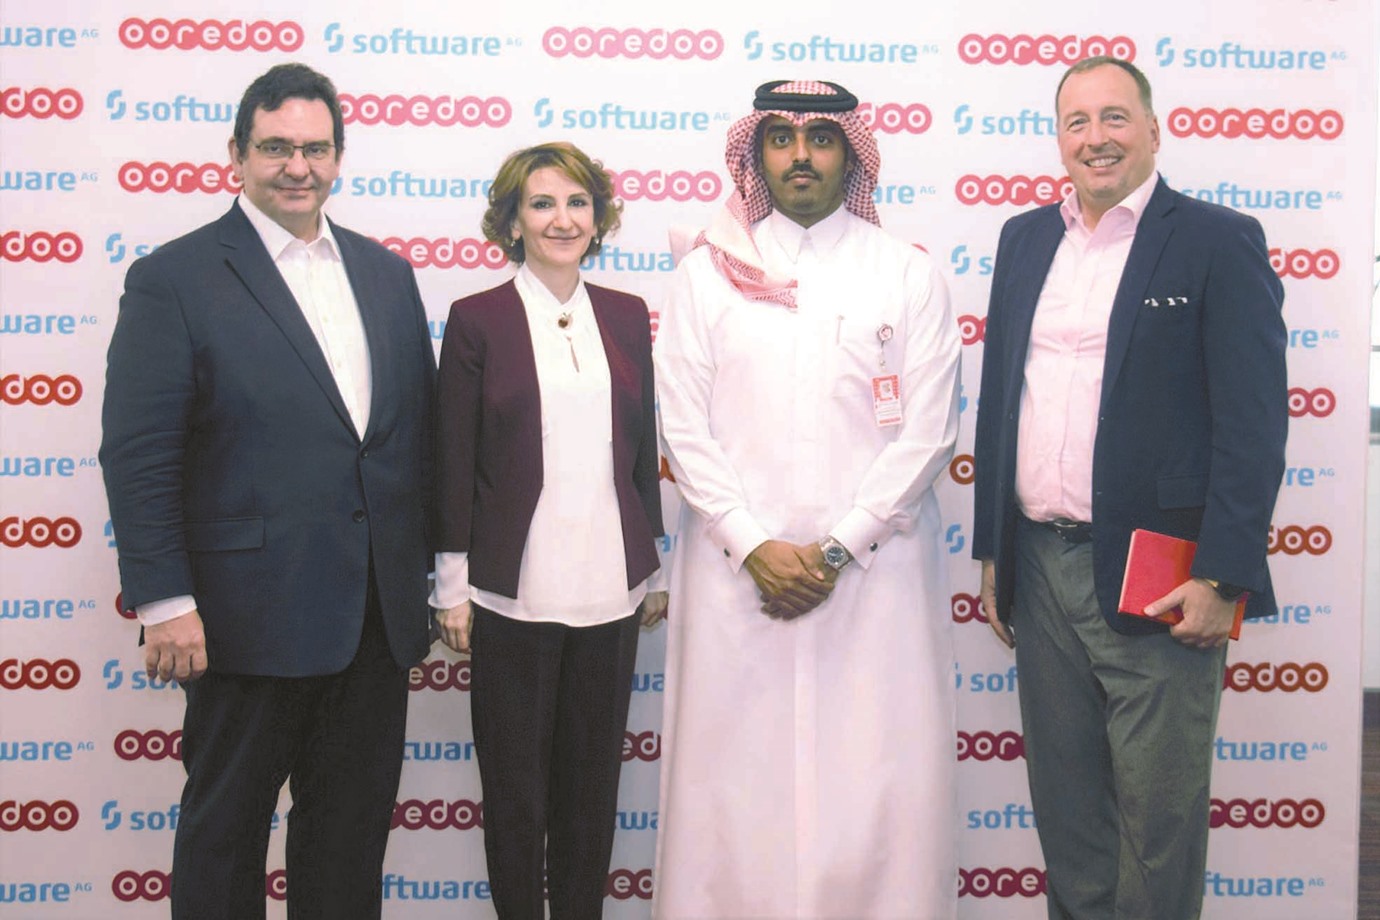 Ooredoo’s new ‘IoT Builder’ to boost digital business in Qatar